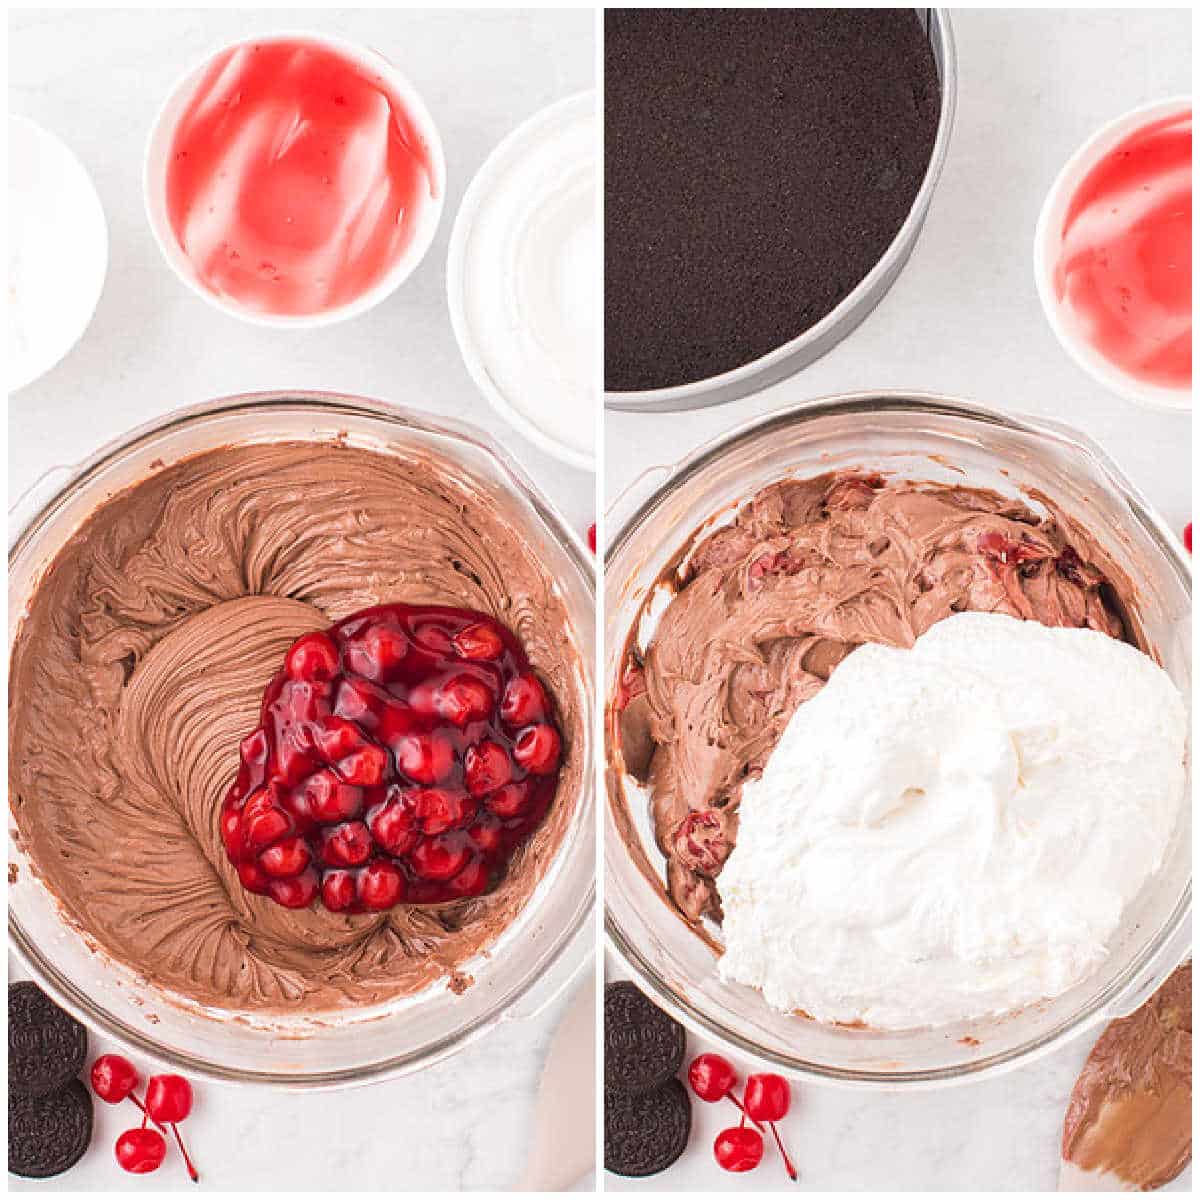 Steps to make black forest cheesecake.